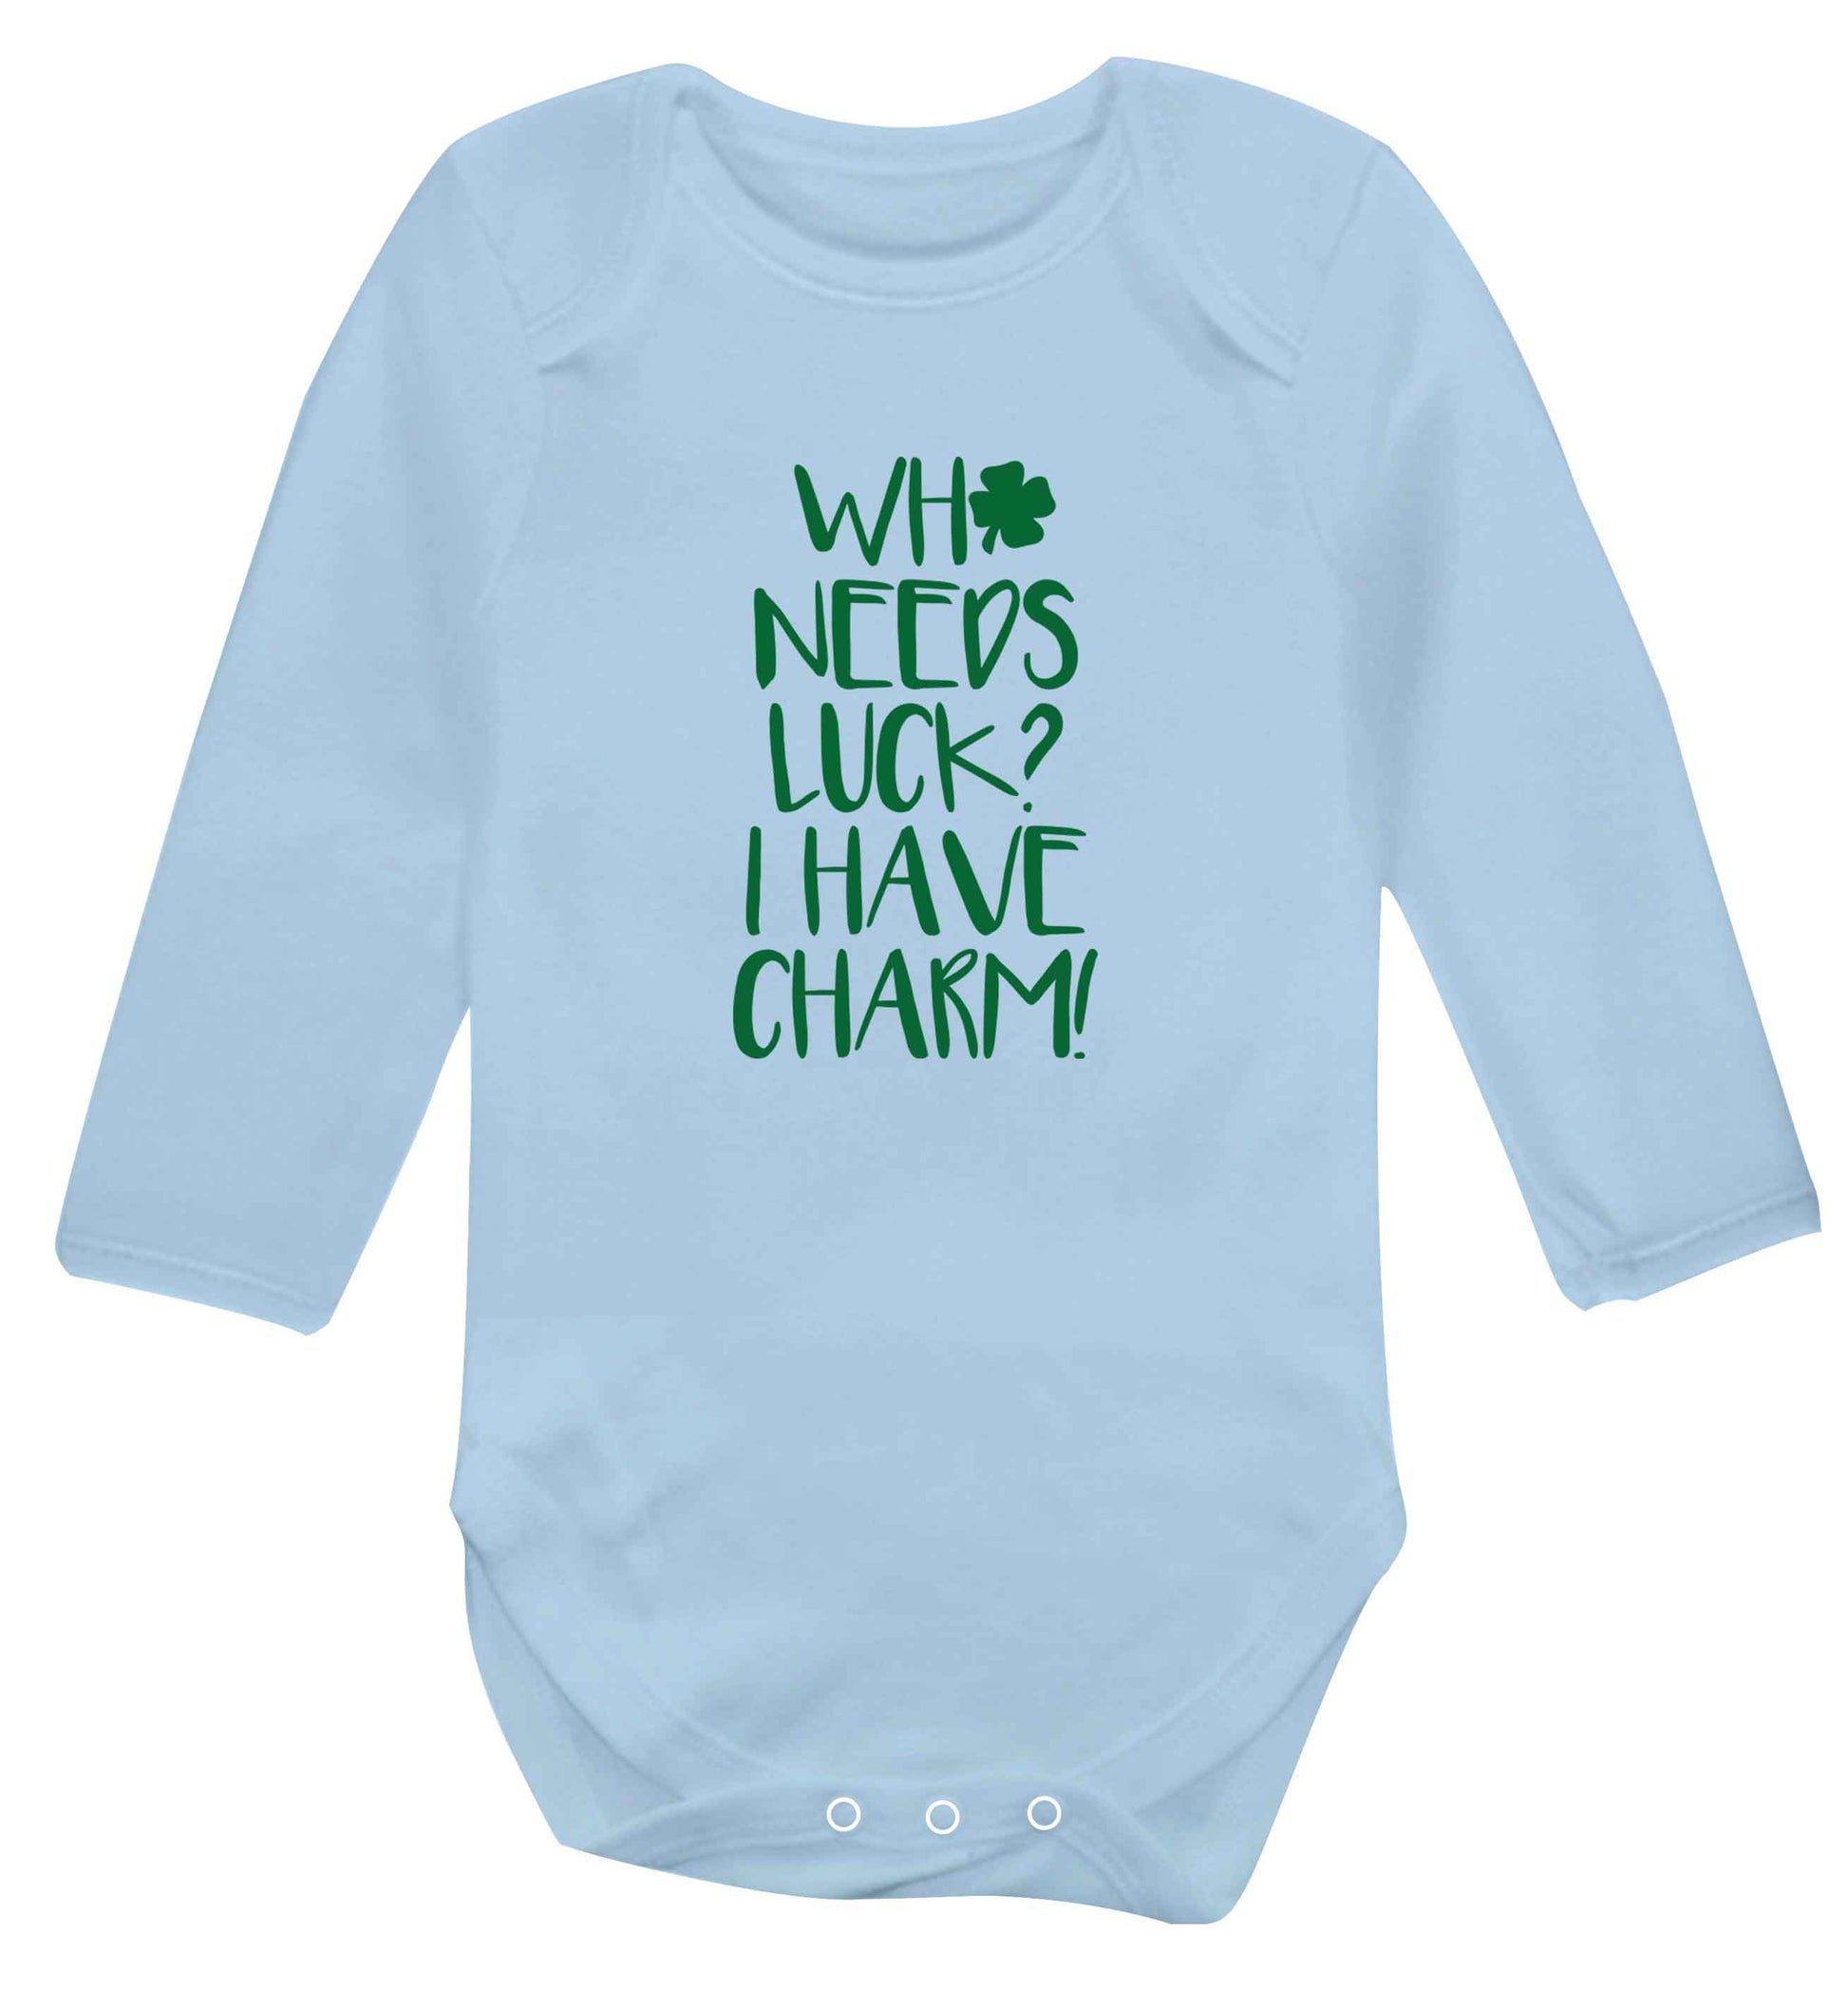 Who needs luck? I have charm! baby vest long sleeved pale blue 6-12 months